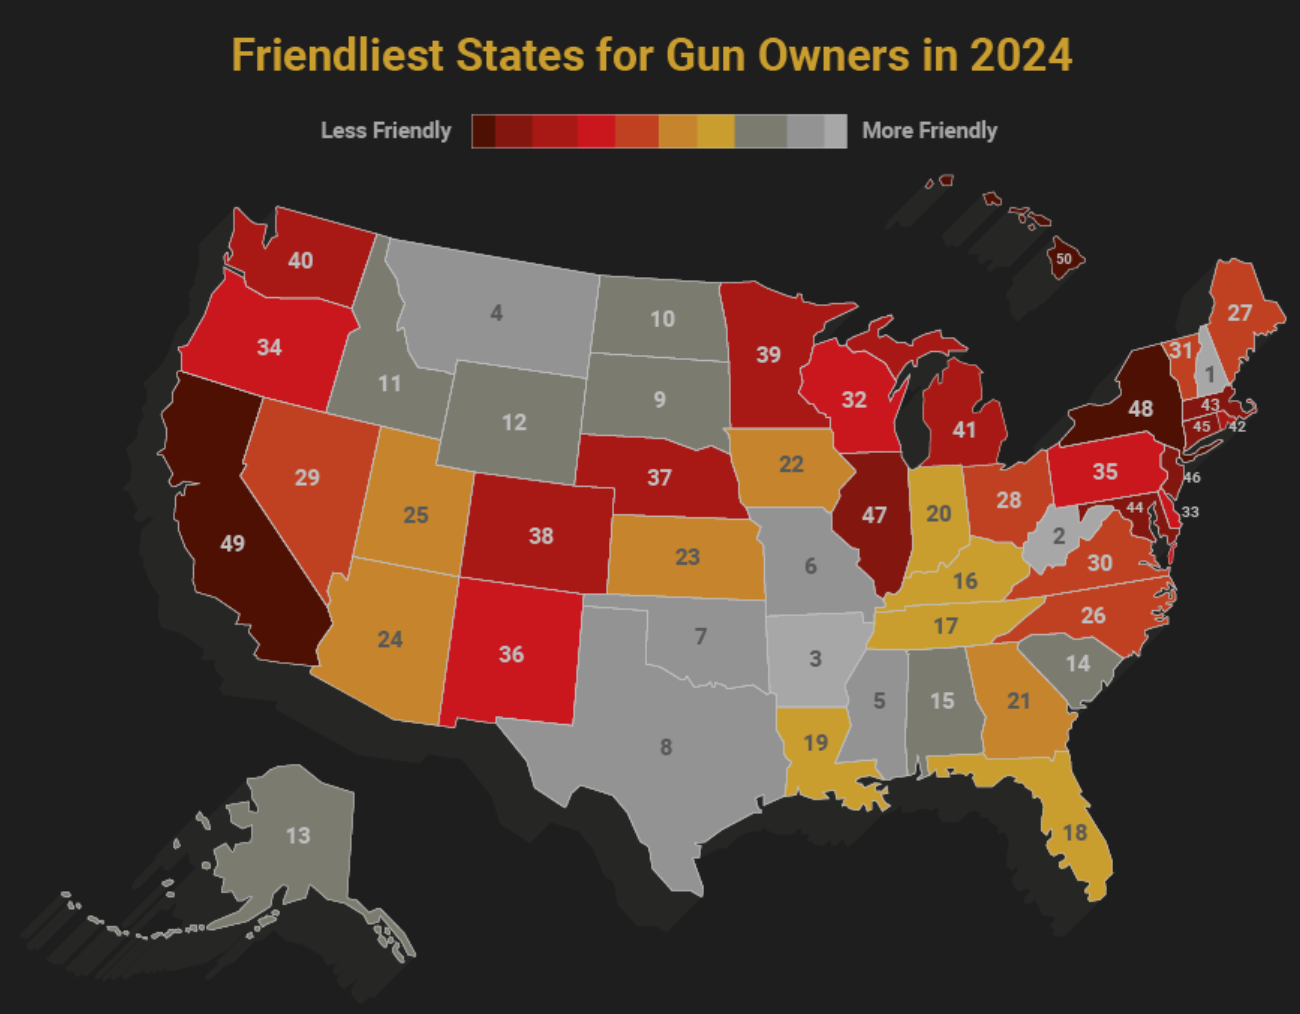 Friendliest States for Gun Owners in 2024; graphic by author.